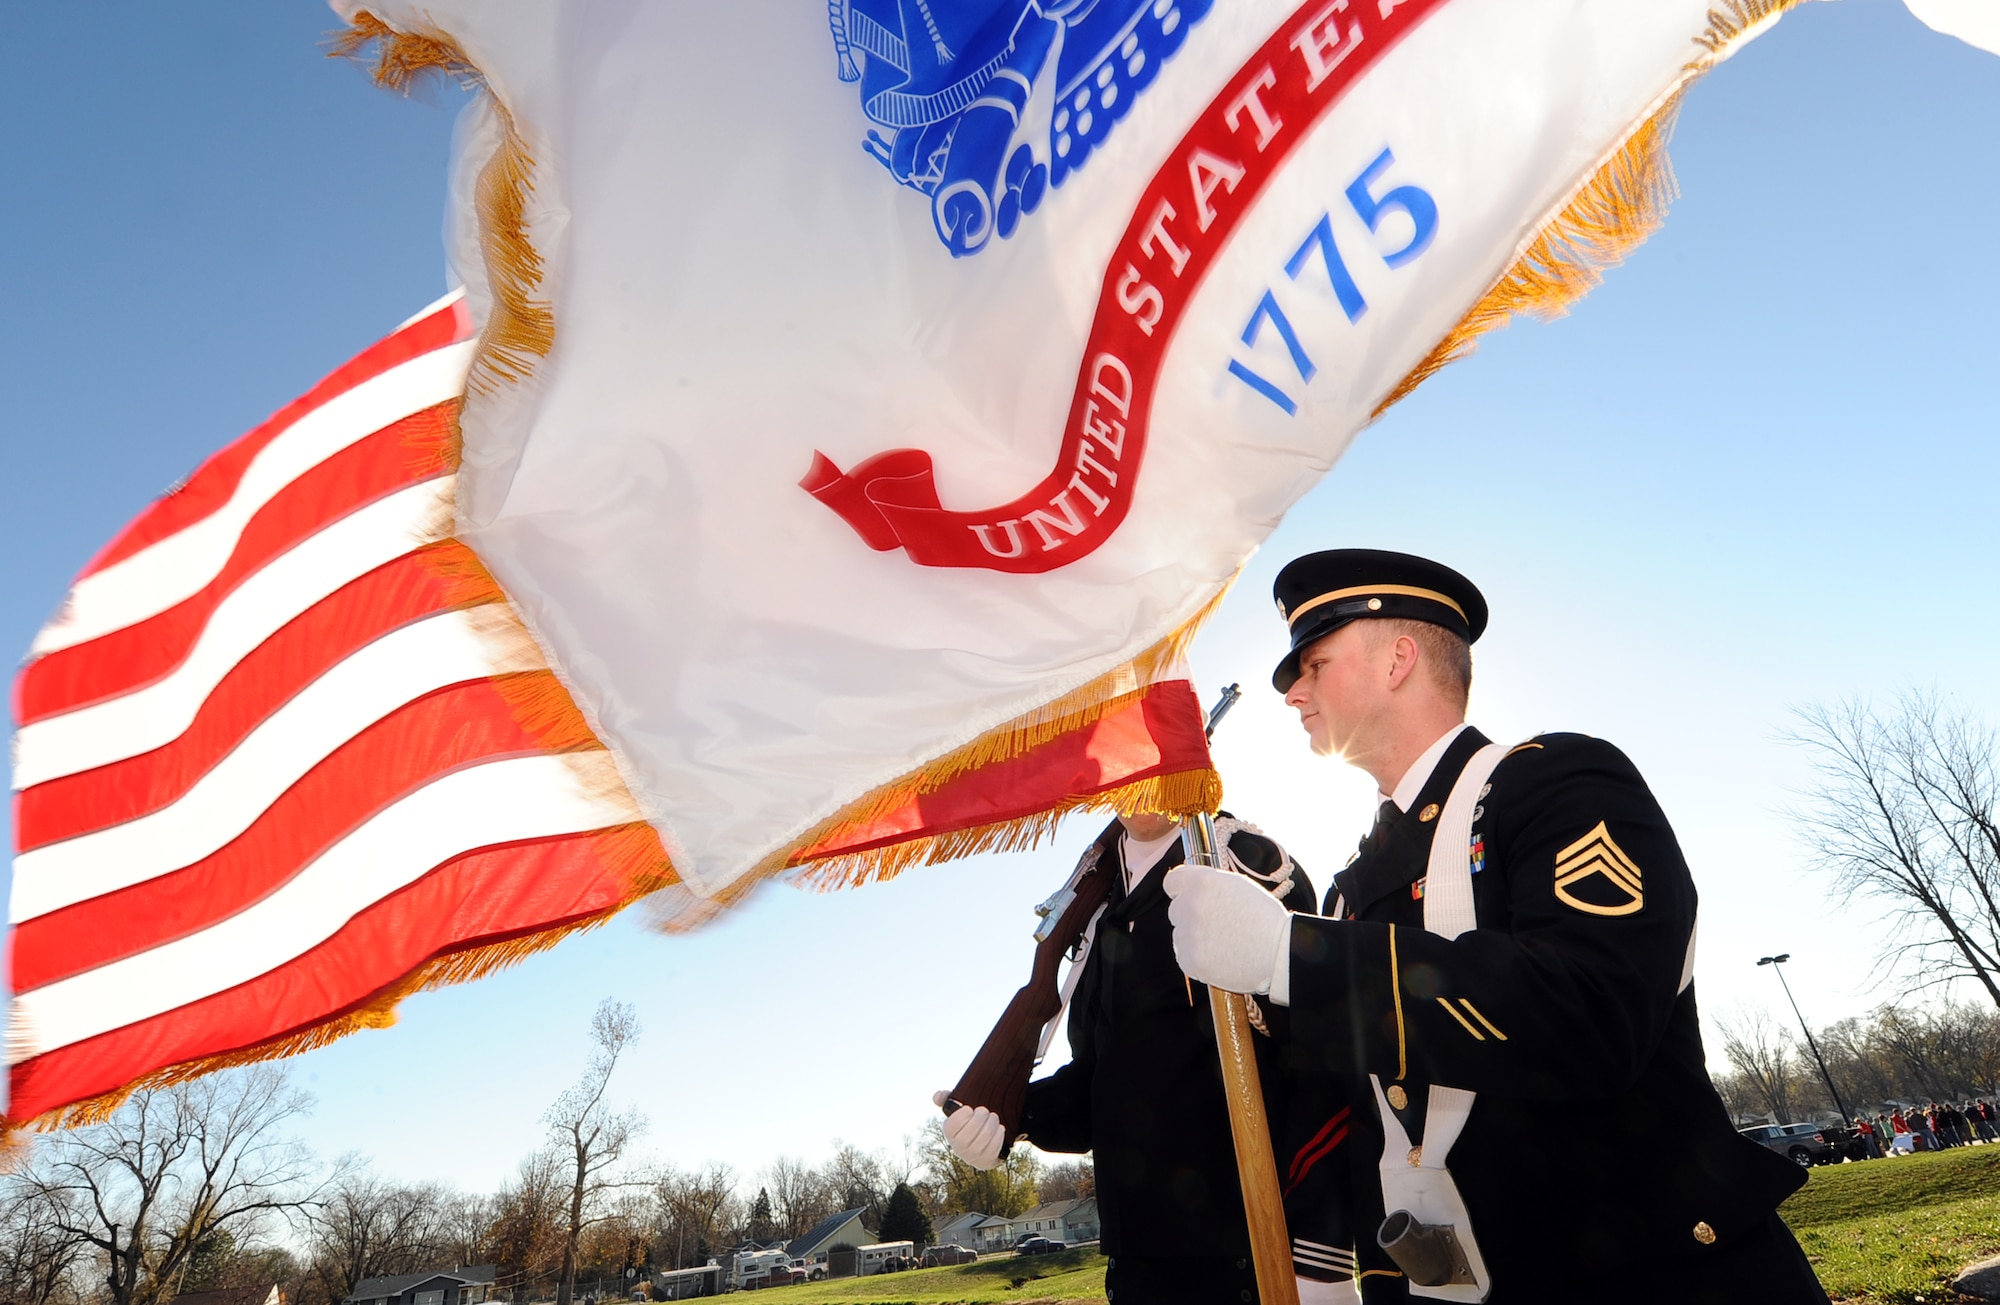 U.S. Army Staff Sgt.  Ralph Pohlman, United States Strategic Command’s Color Guard, holds the U.S. flag to begin the formation for the Veterans Day Parade held in Bellevue, Neb. Nov. 10.  The color guard represents each of the branches of the armed forces and leads the military procession down Mission Avenue.  (U.S. Air Force photo by Josh Plueger/Released)